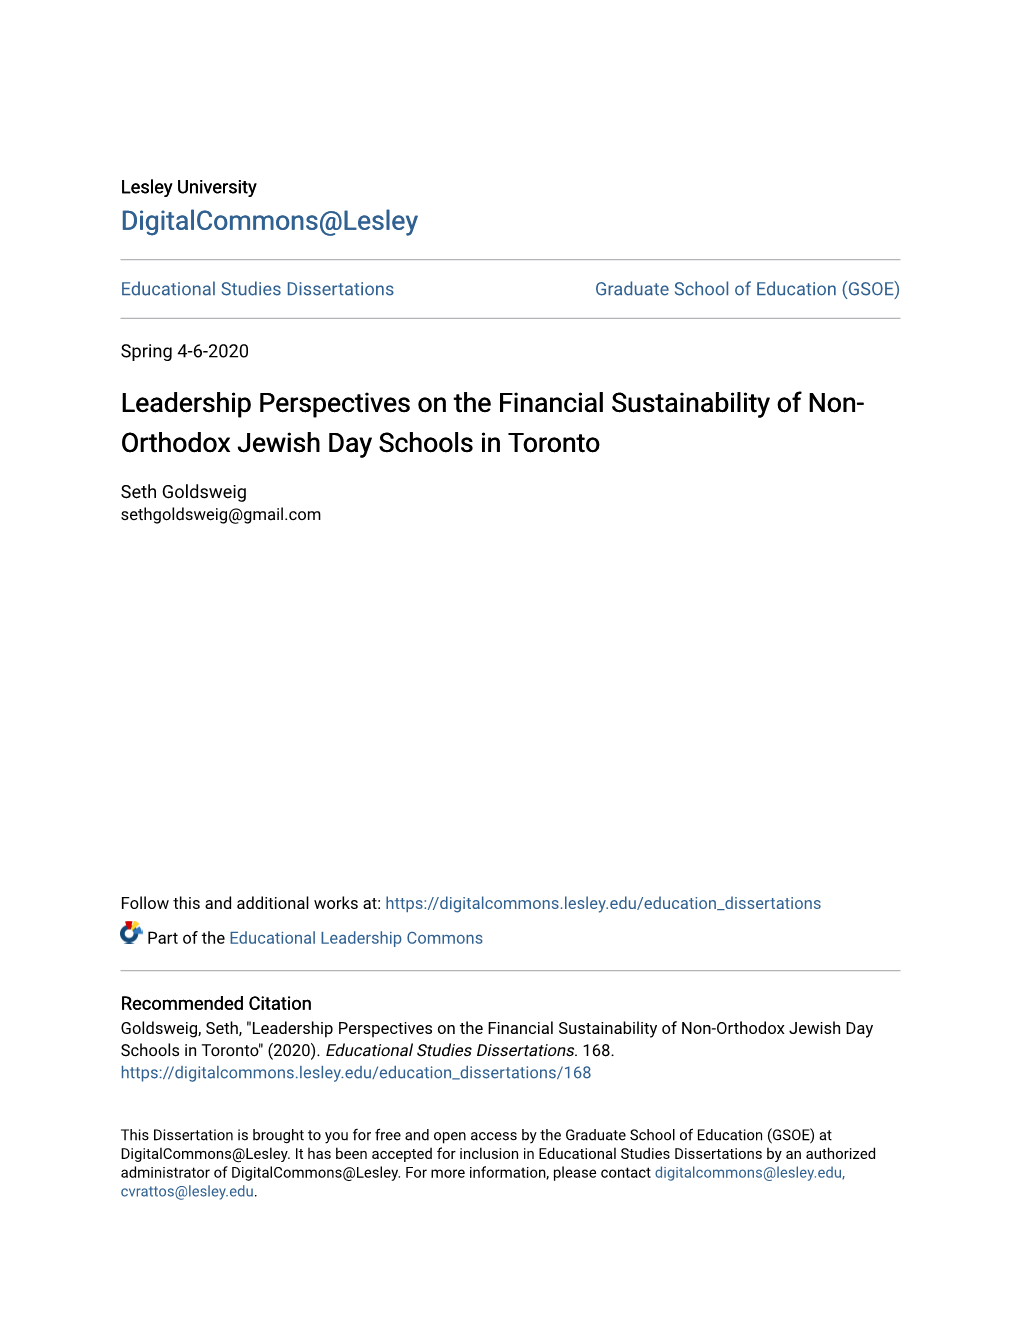 Leadership Perspectives on the Financial Sustainability of Non- Orthodox Jewish Day Schools in Toronto